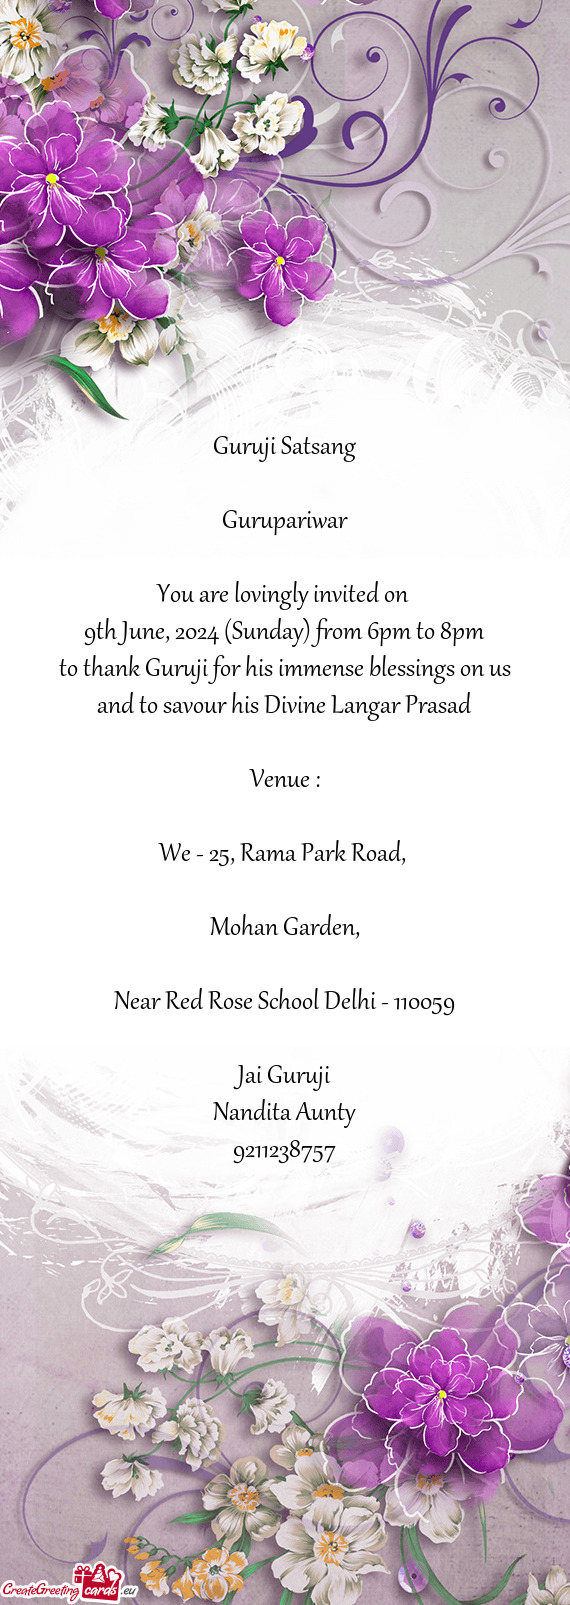 9th June, 2024 (Sunday) from 6pm to 8pm